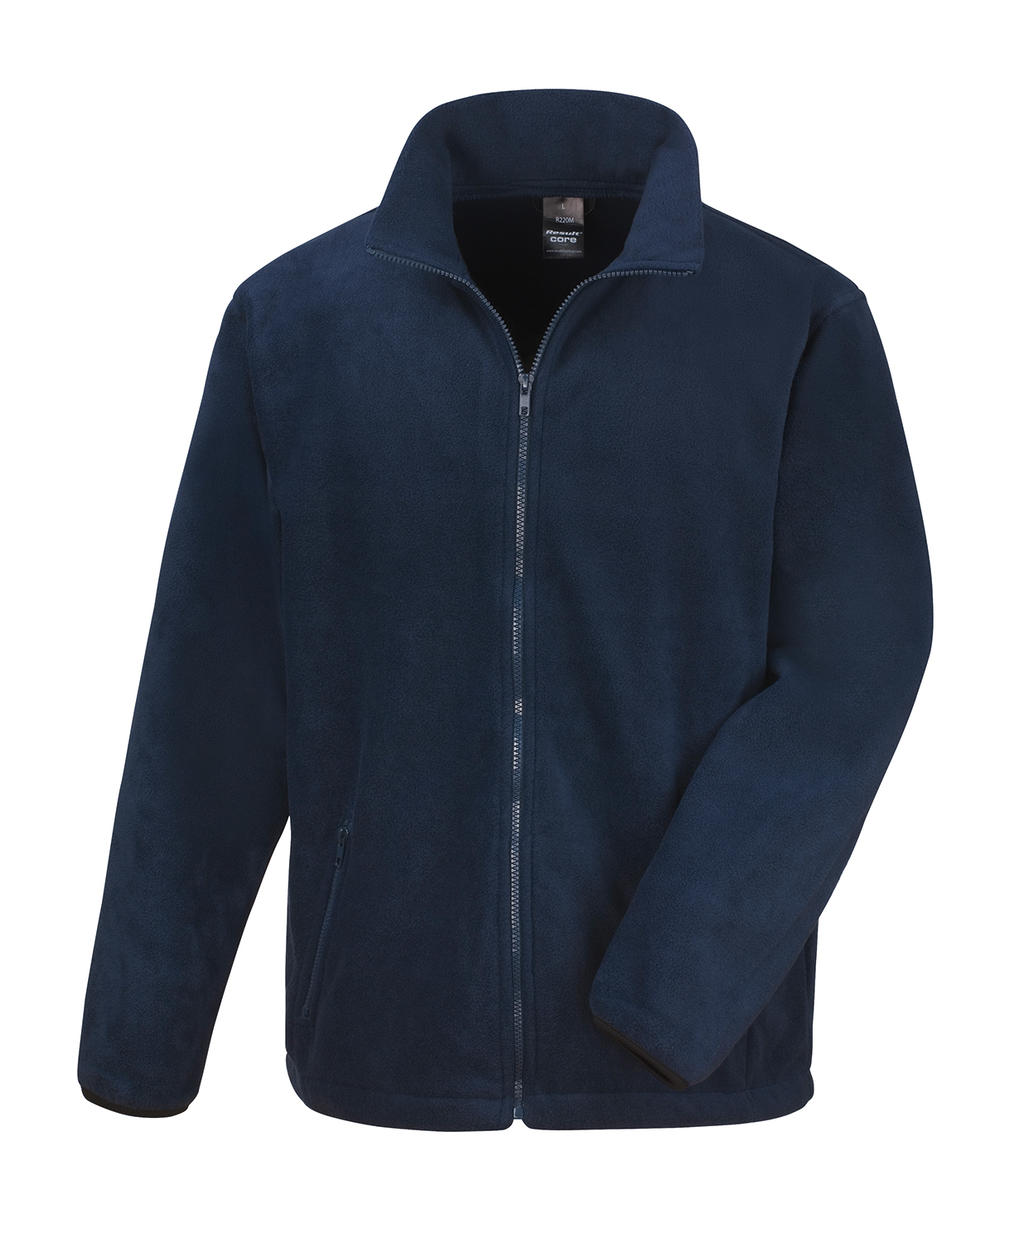  Fashion Fit Outdoor Fleece in Farbe Navy